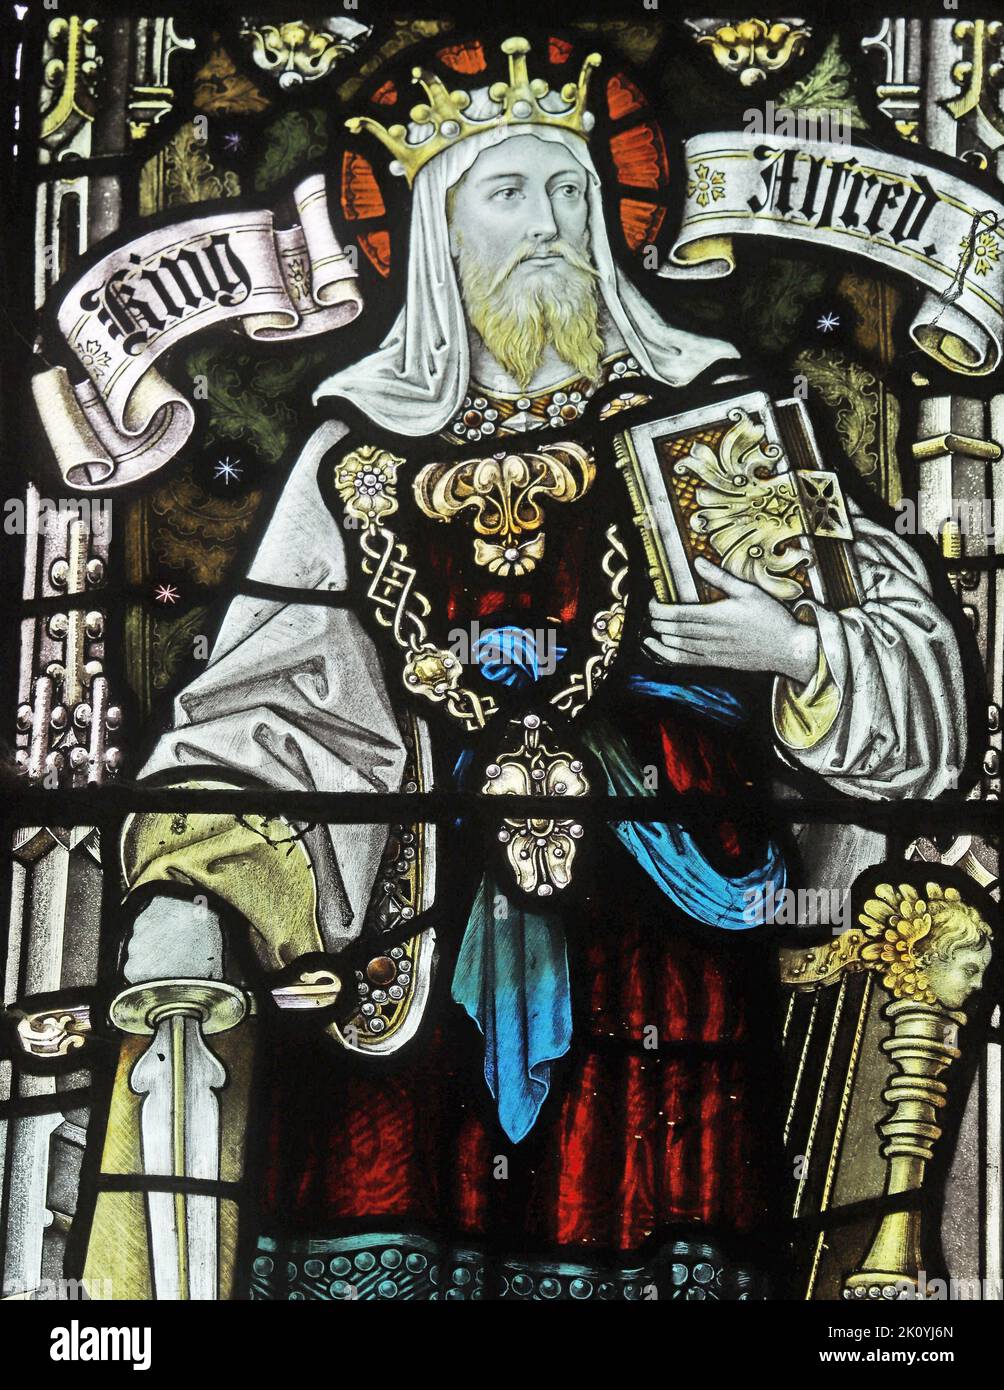 Stained glass window by Percy Bacon & Brothers depicting King Alfred, Mawgan-in-Pyder, Cornwall Stock Photo